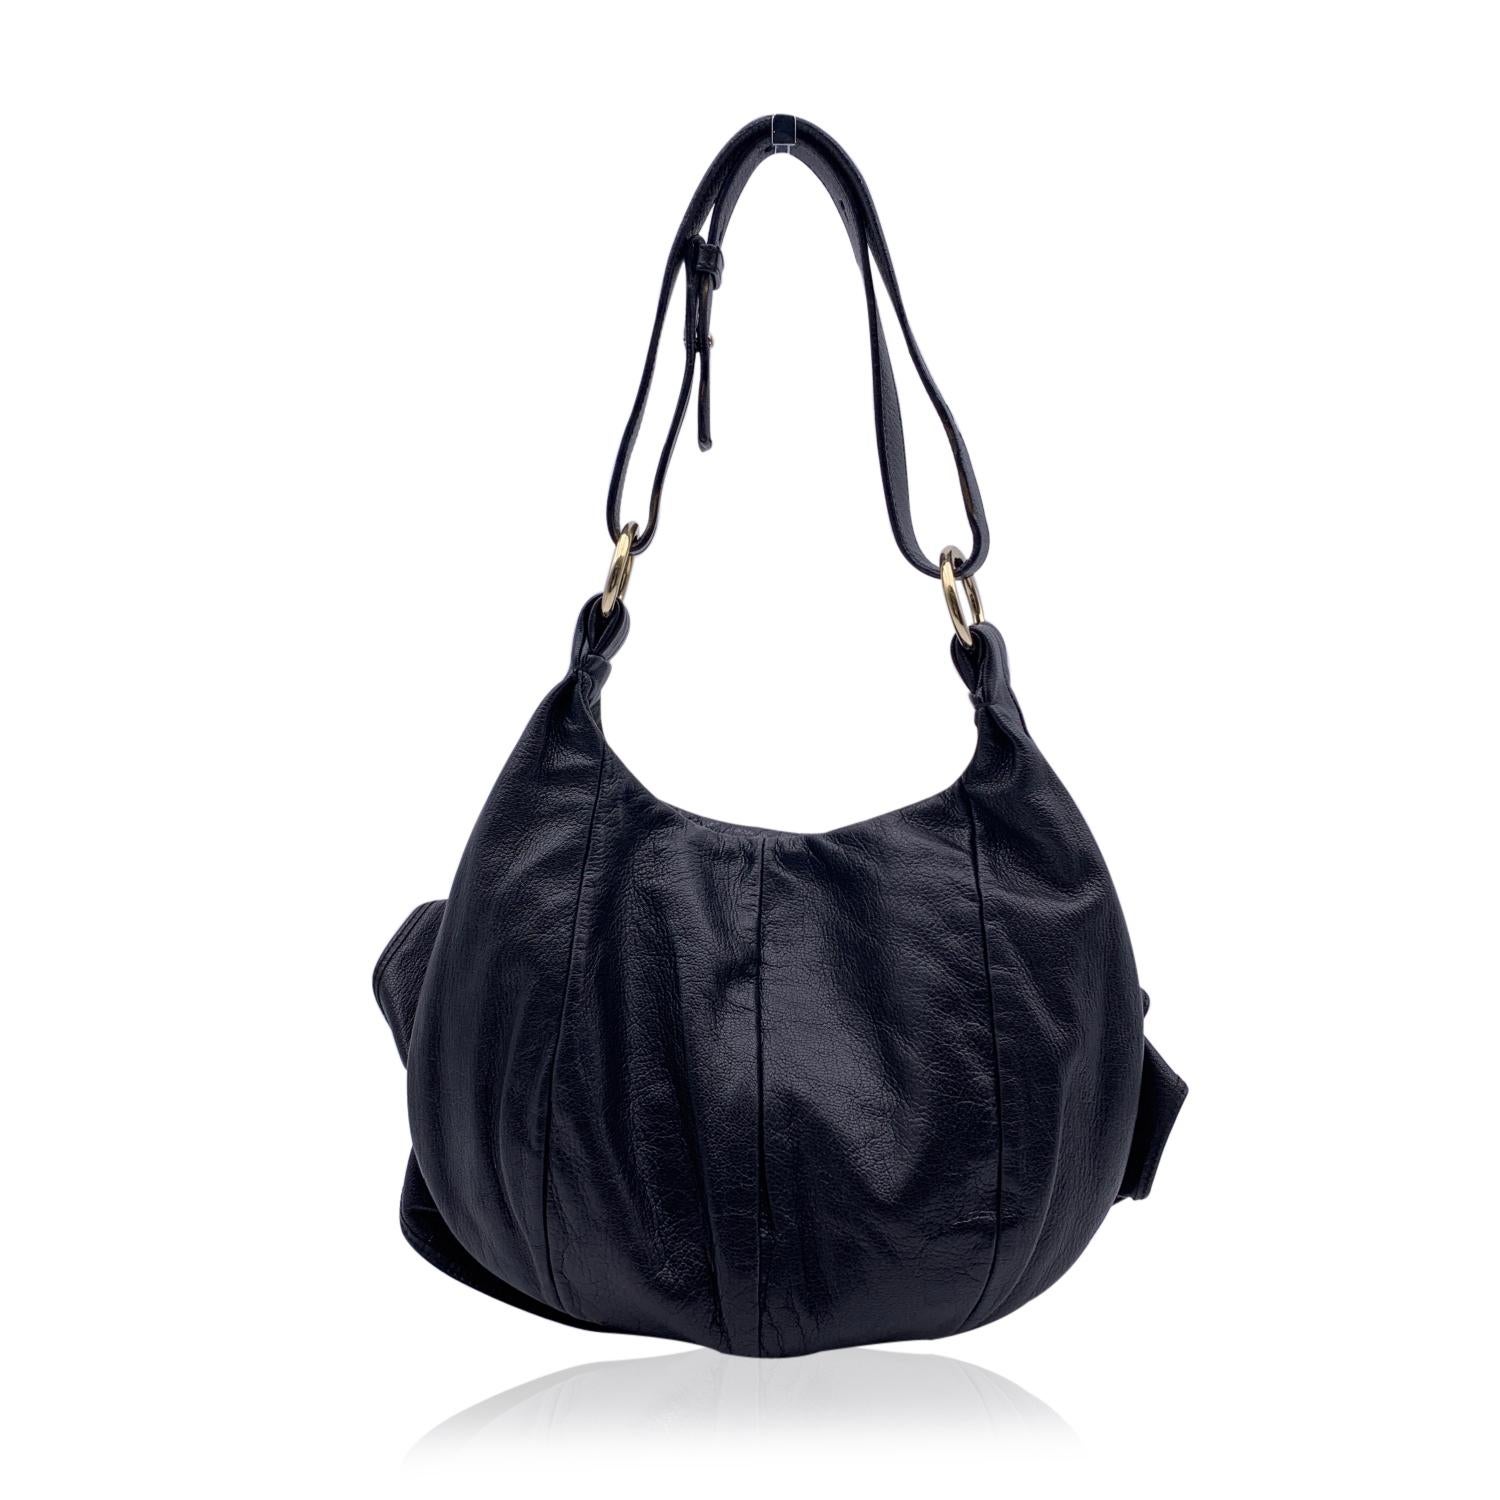 Yves Saint Laurent Black Ruffled Leather Hobo Tote Shoulder Bag In Excellent Condition For Sale In Rome, Rome